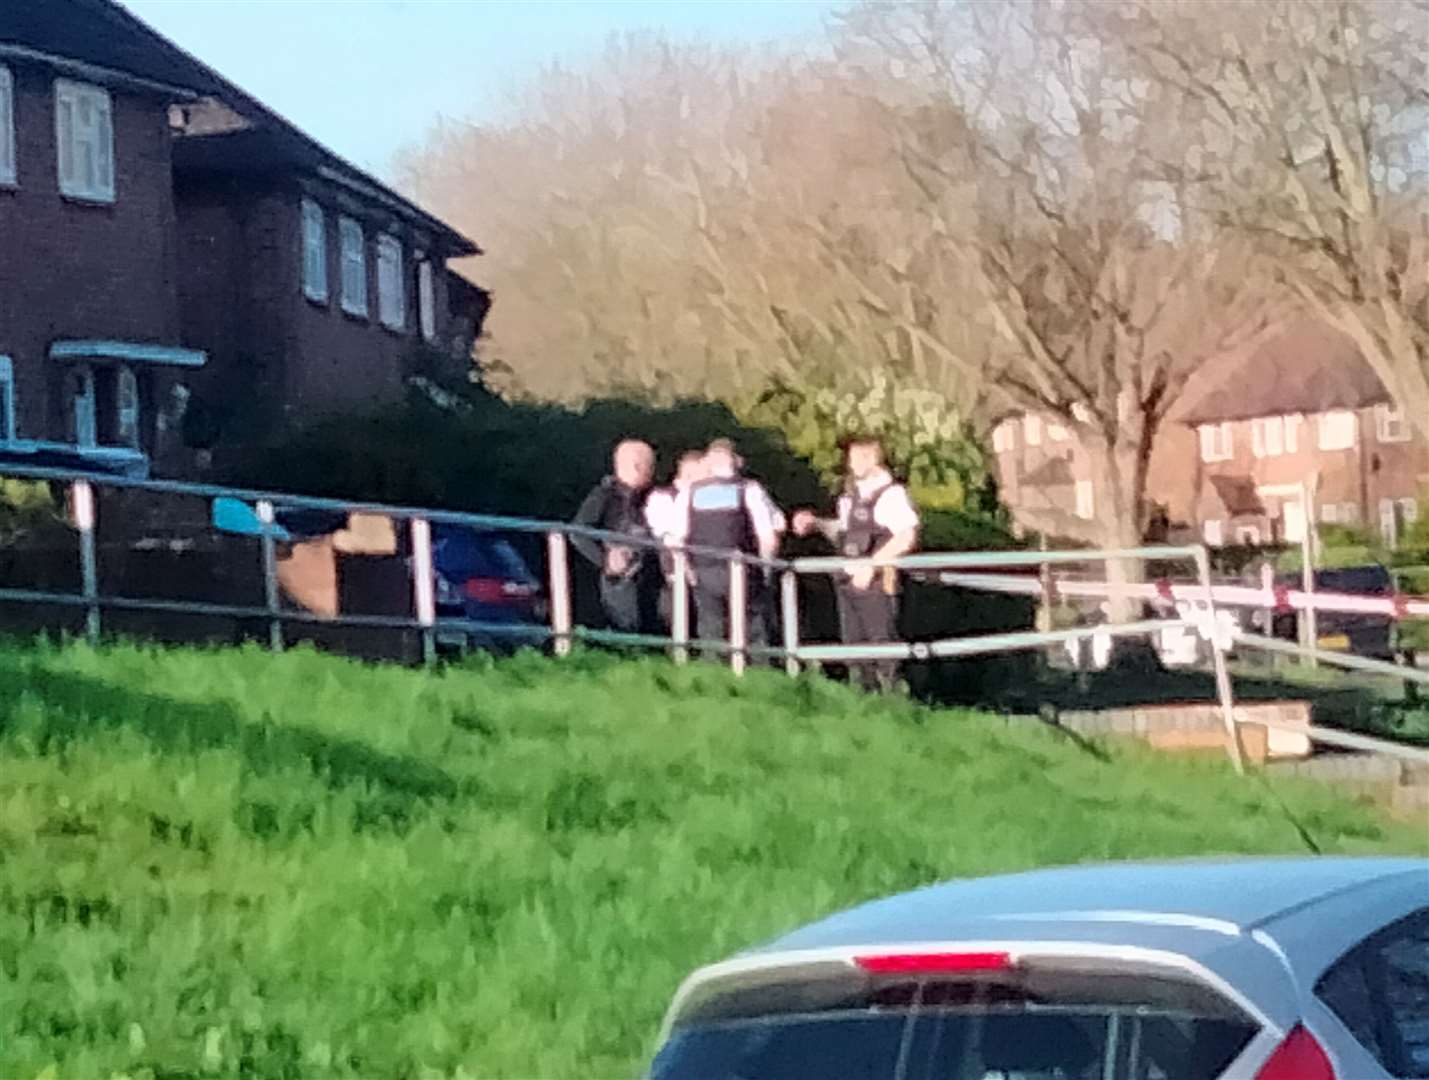 Police at the crime scene in Leesons Hill, St Pauls Cray